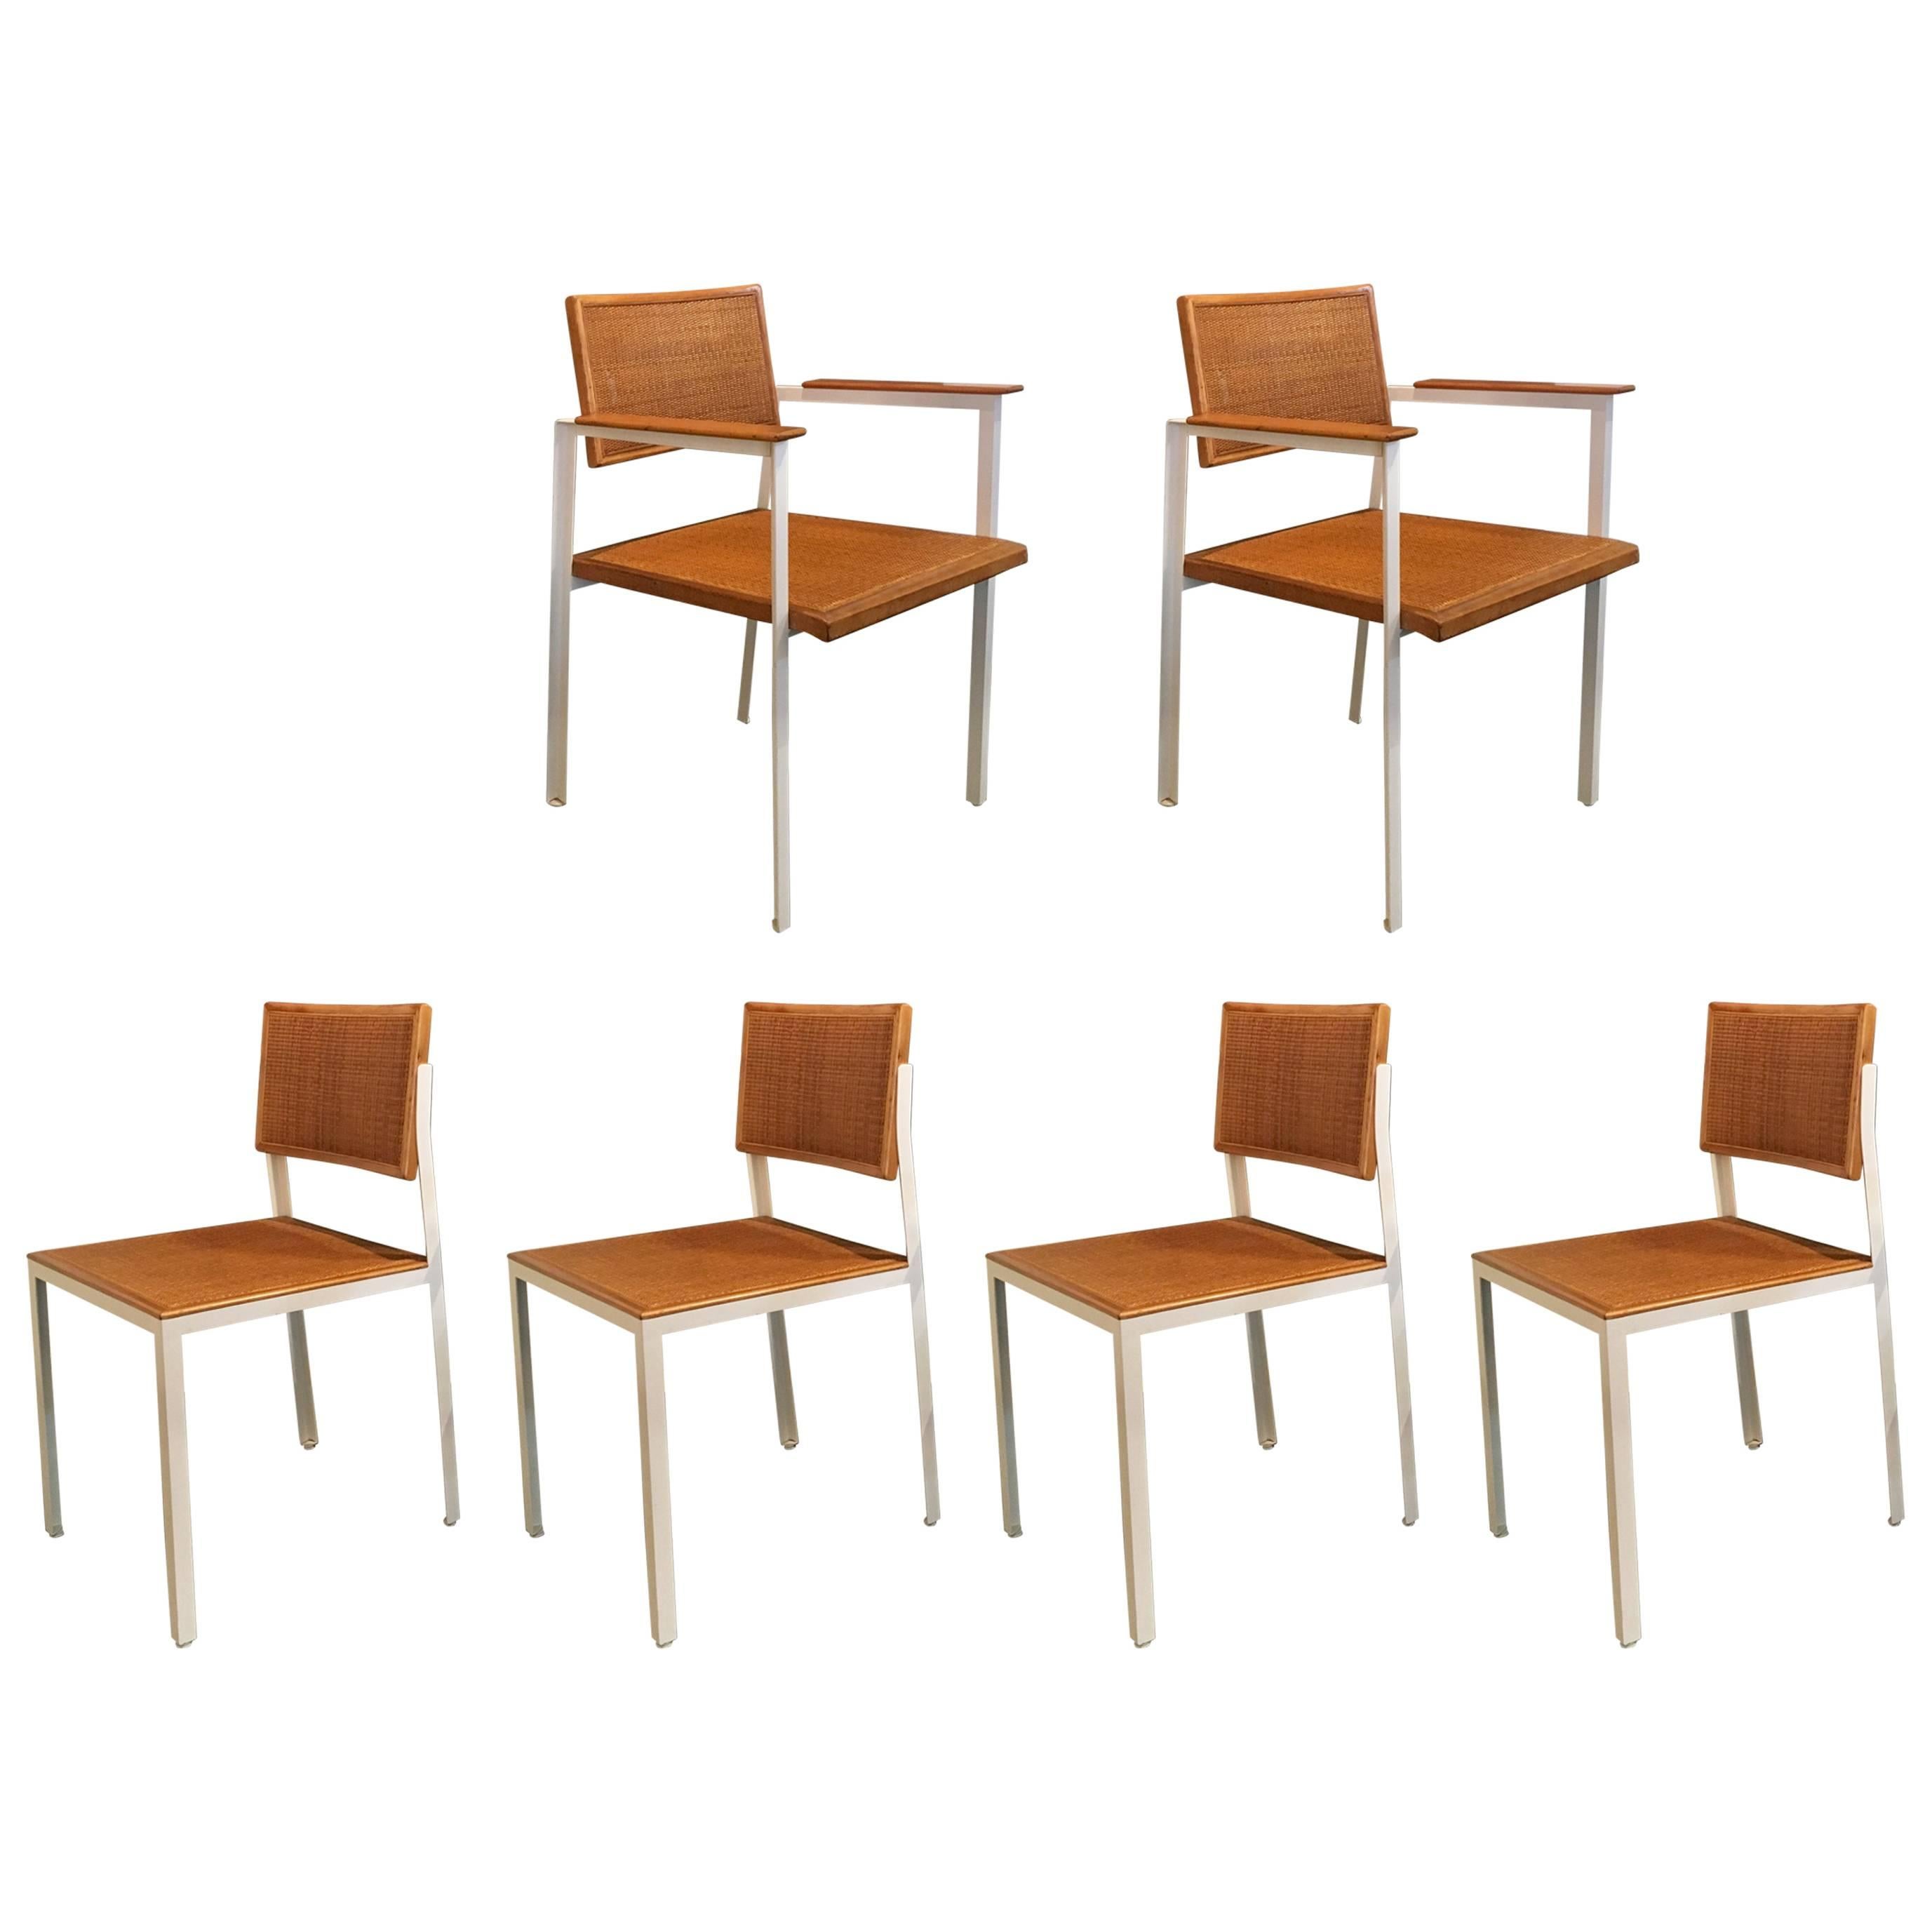 George Nelson Steel Frame Chairs, Set of Six, Herman Miller 1952